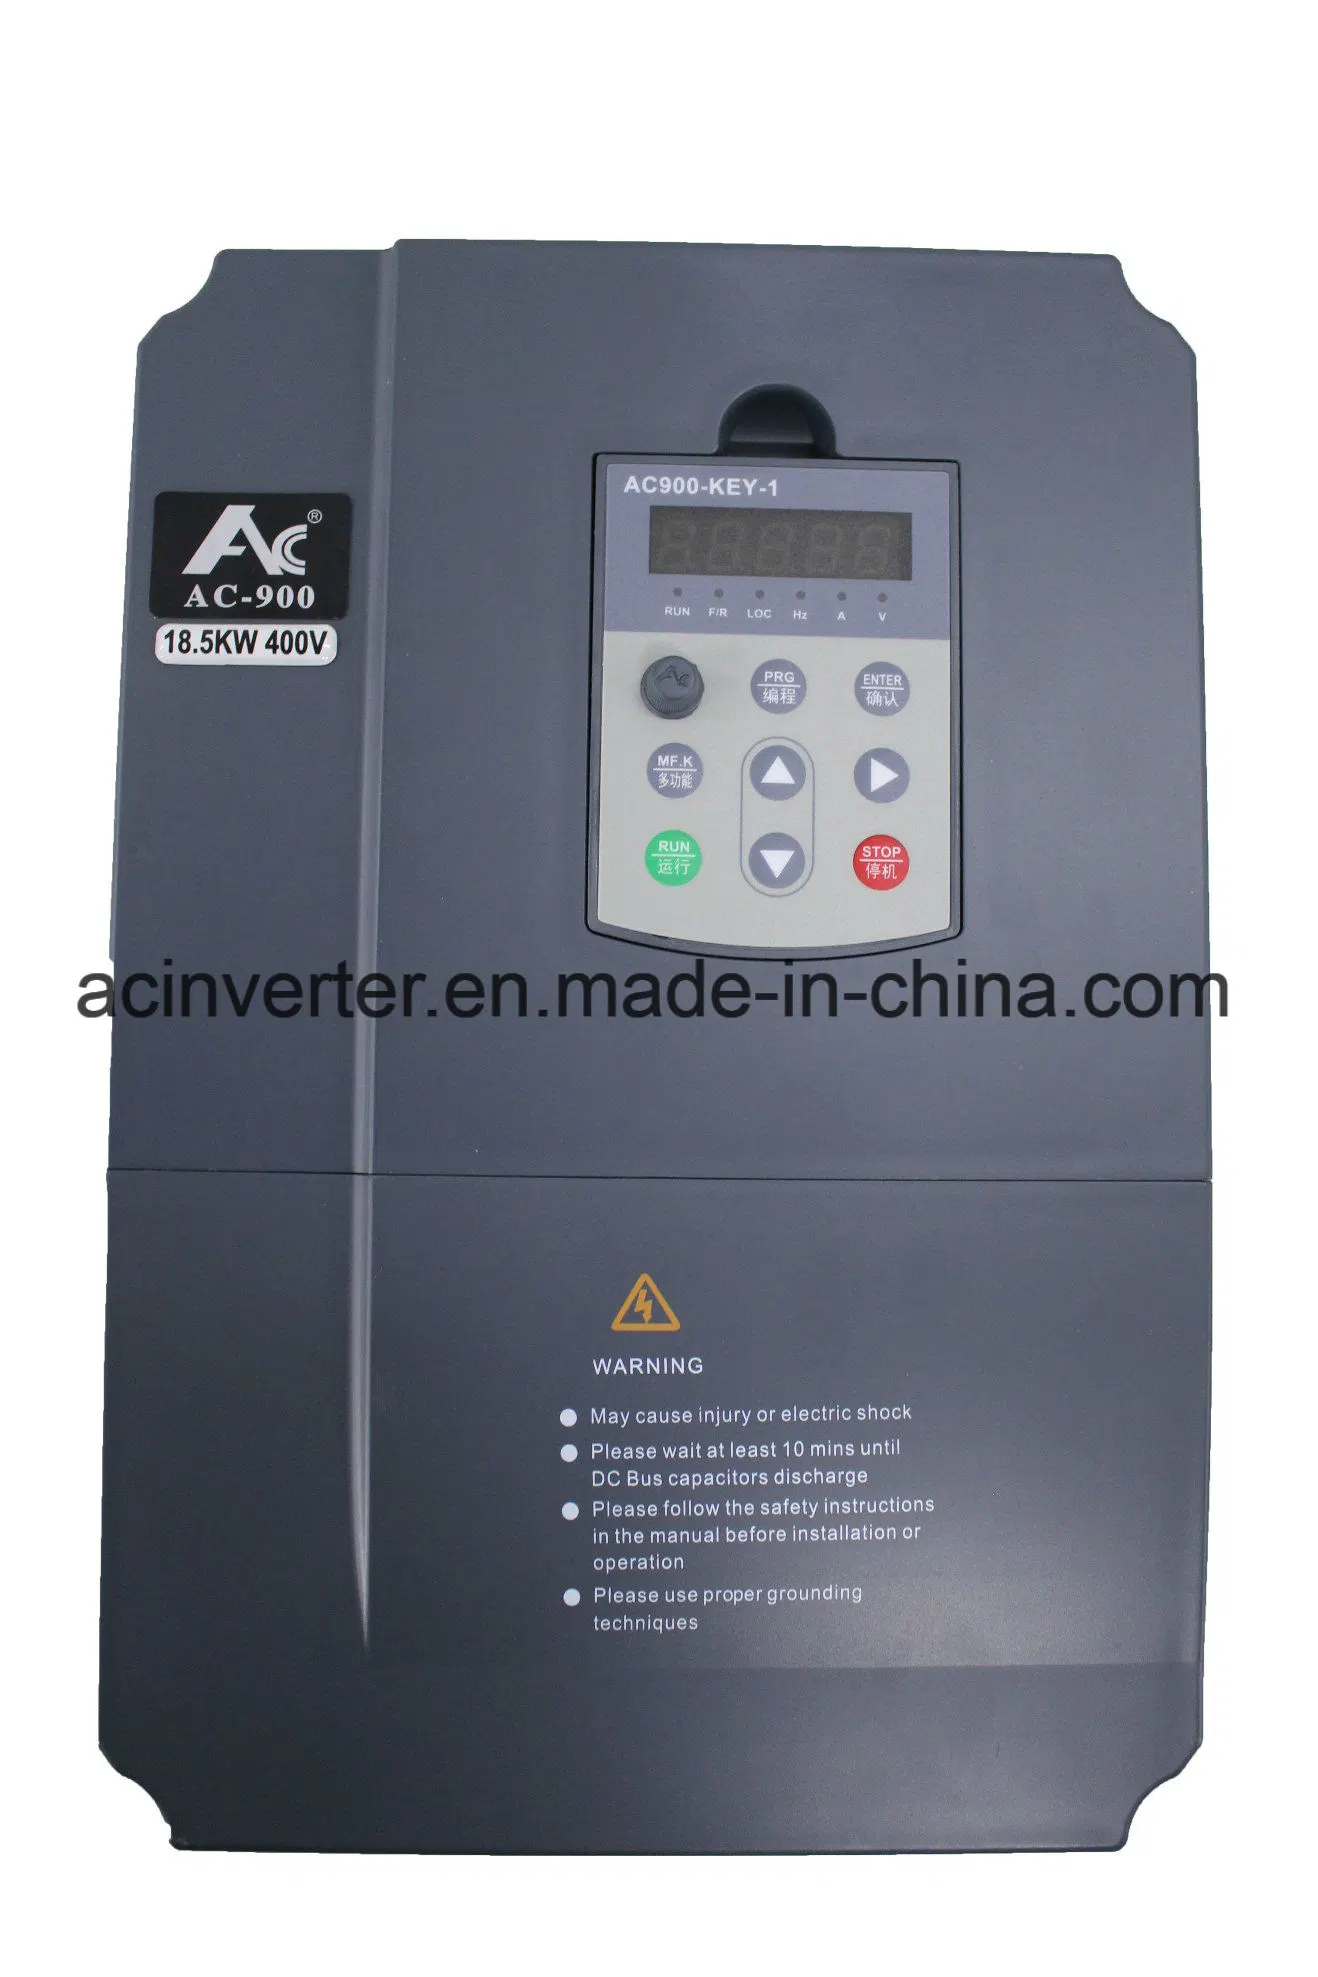 AC400V AC Motor Industrial Drive Variable Voltage Variable Frequency Inverter 3p 5.5kw with User Manual